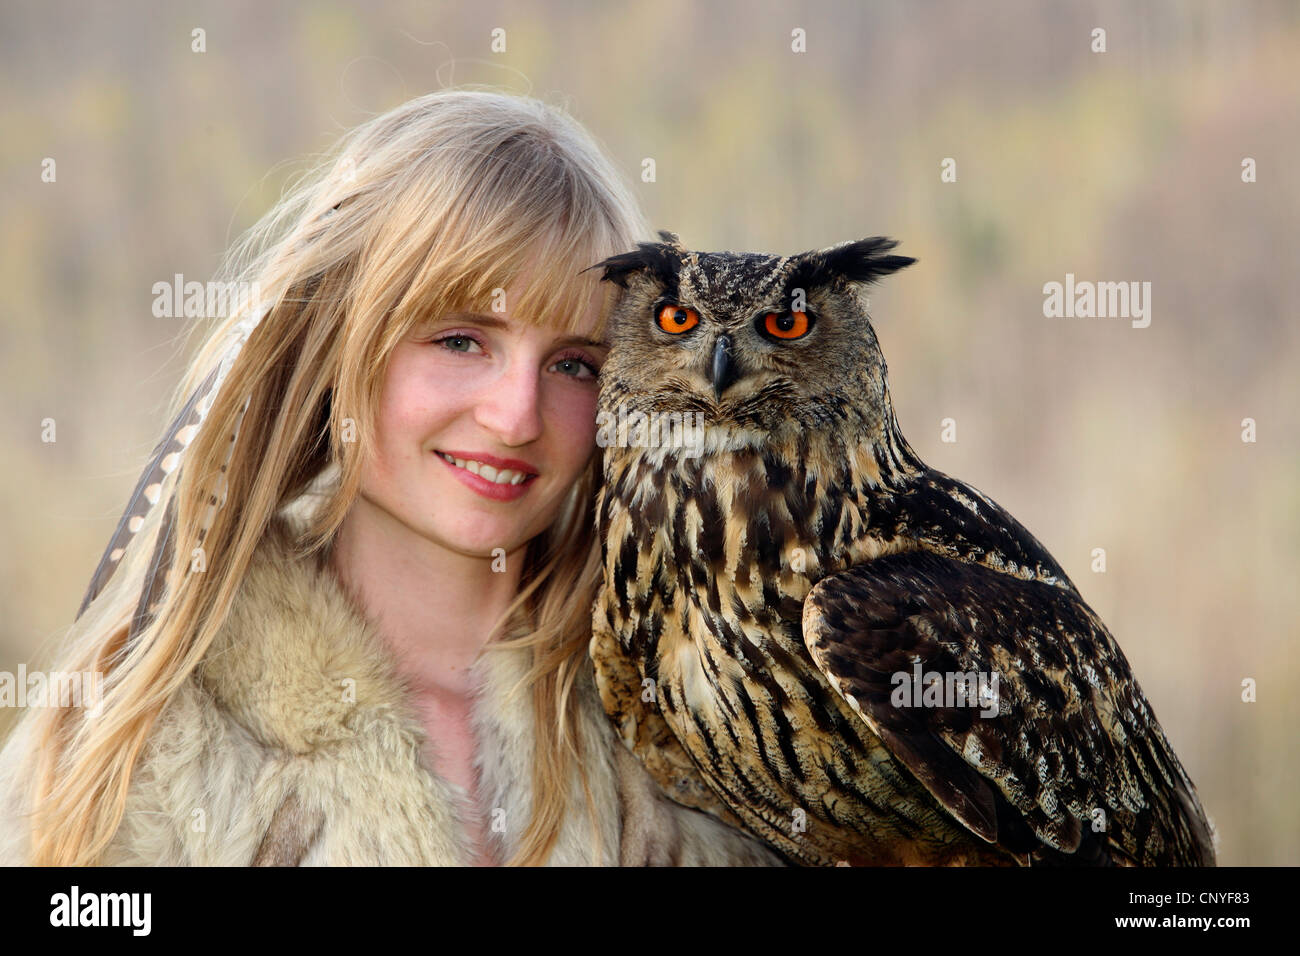 northern eagle owl (Bubo bubo), on the arm of a young woman Stock Photo